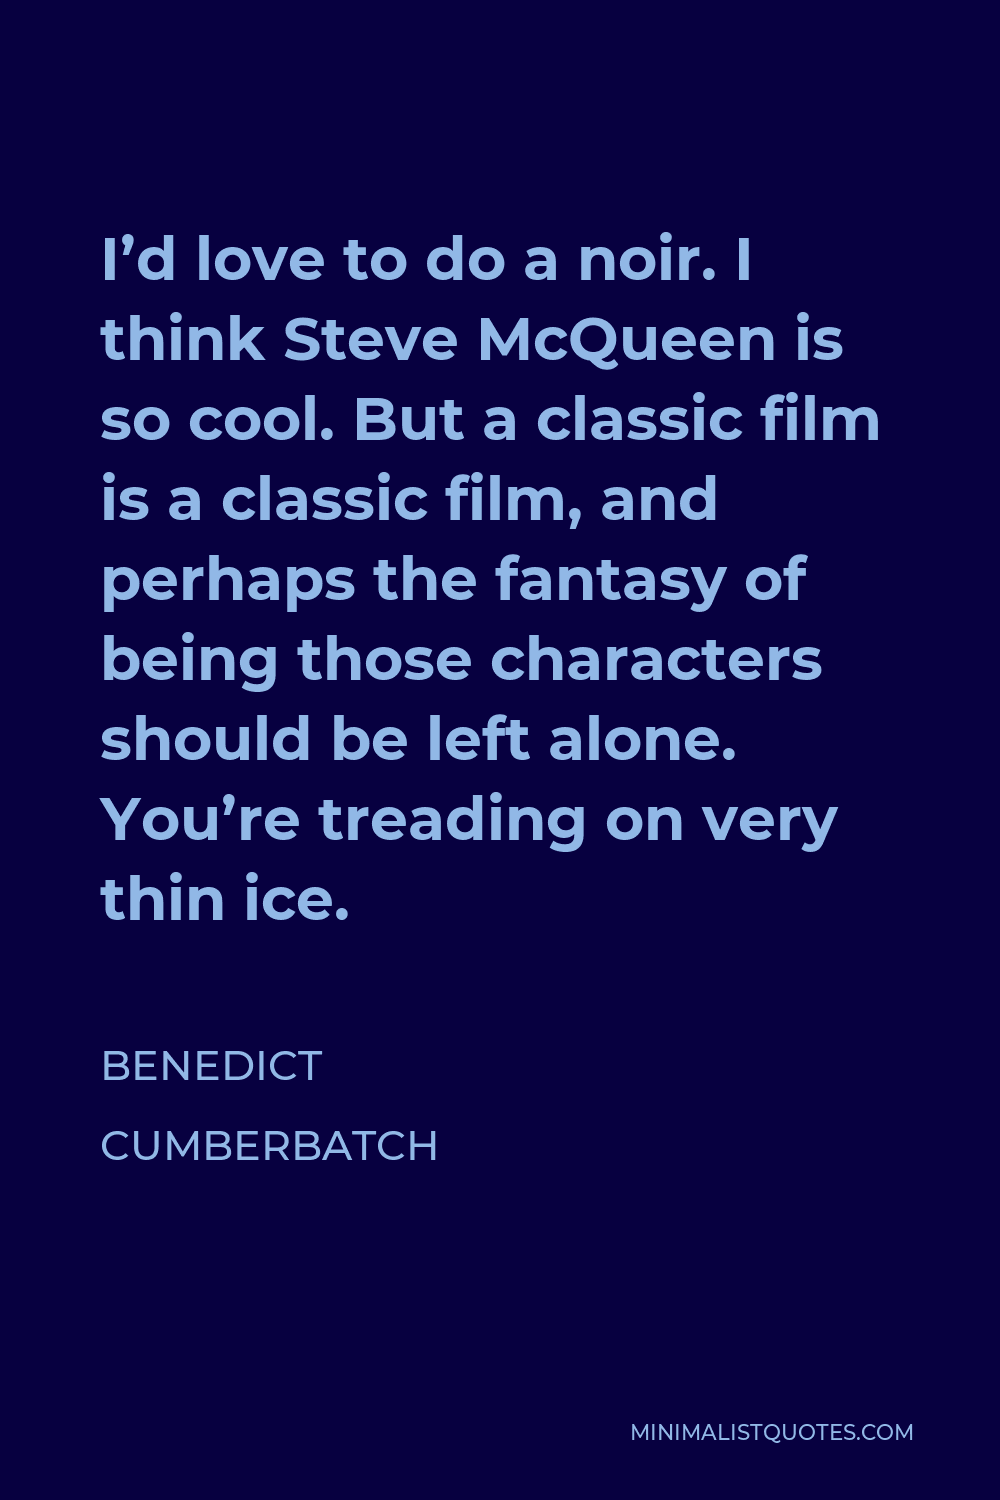 Benedict Cumberbatch Quote - I’d love to do a noir. I think Steve McQueen is so cool. But a classic film is a classic film, and perhaps the fantasy of being those characters should be left alone. You’re treading on very thin ice.